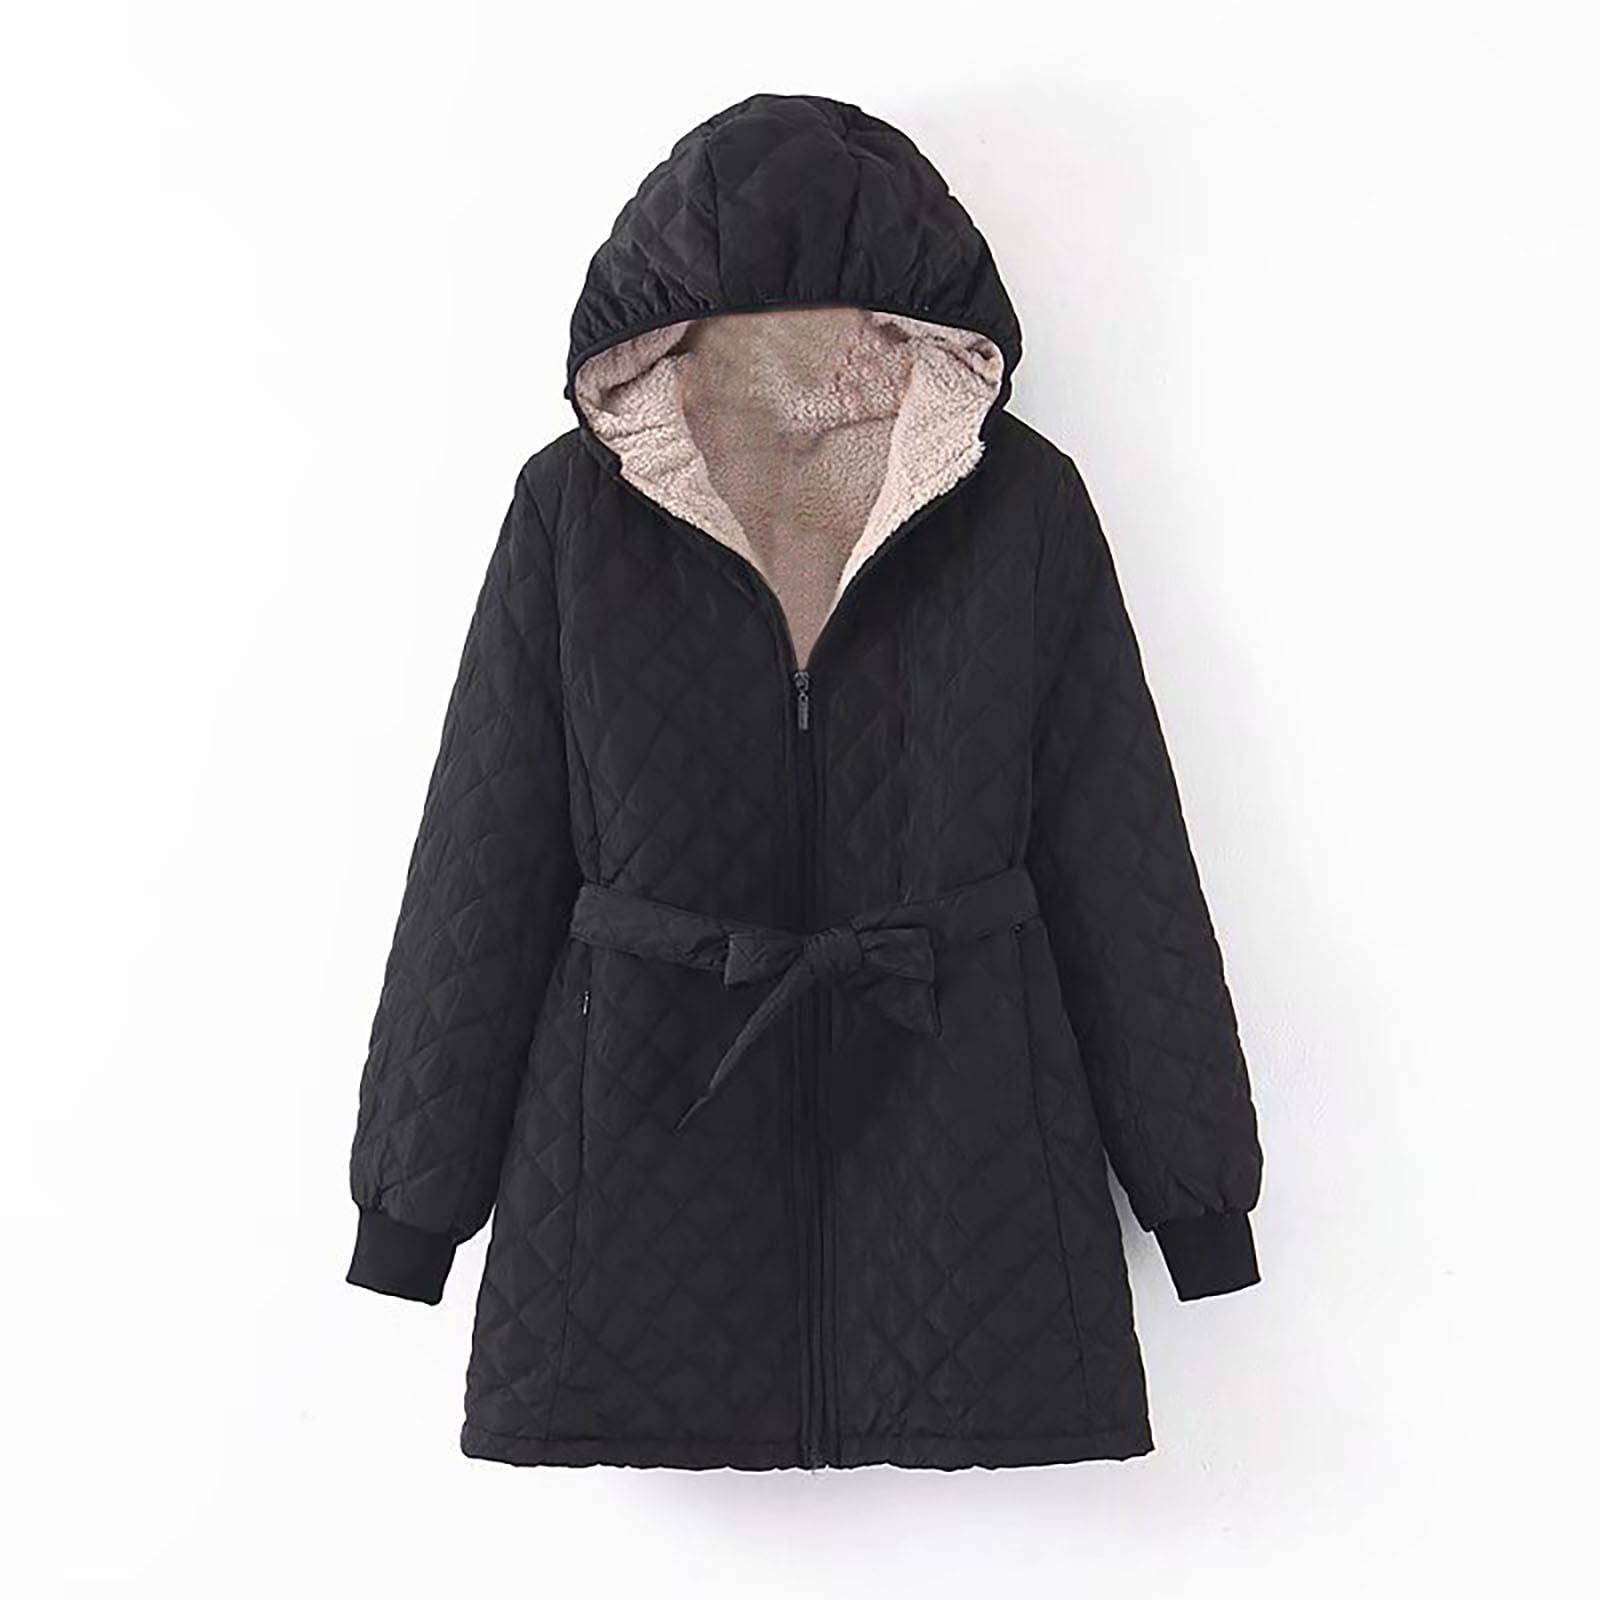 Augper Womens Hooded Warm Winter Coats with Faux Fur Lined Outerwear ...